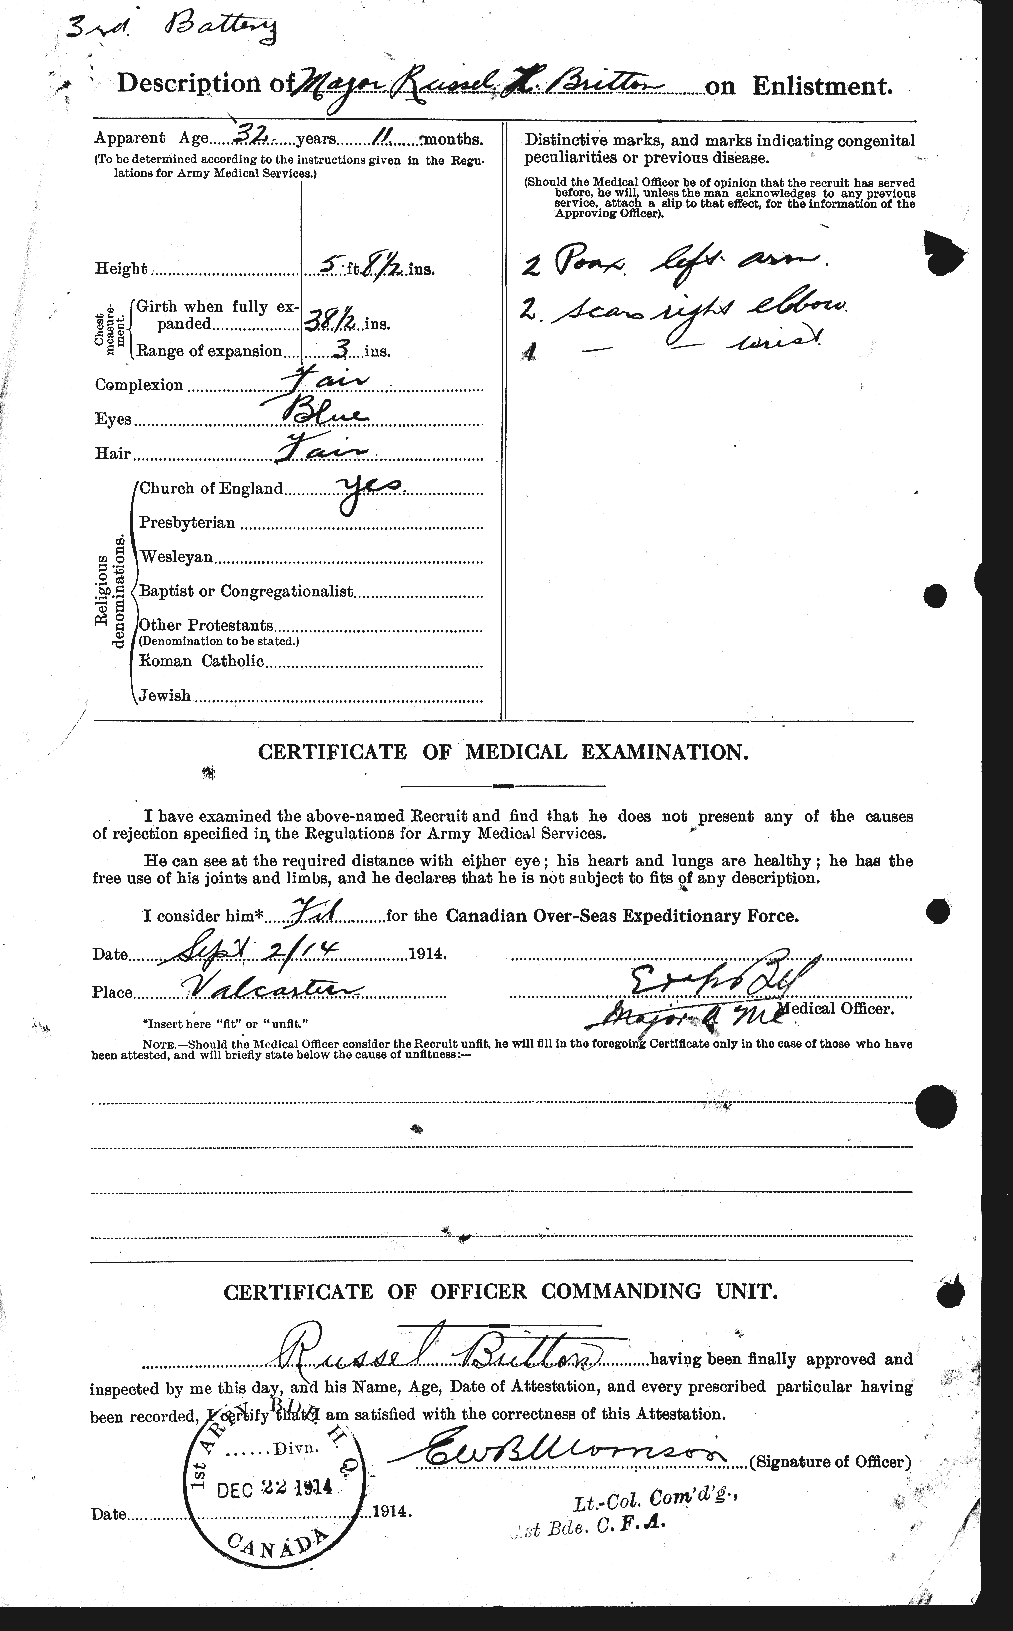 Personnel Records of the First World War - CEF 261959b